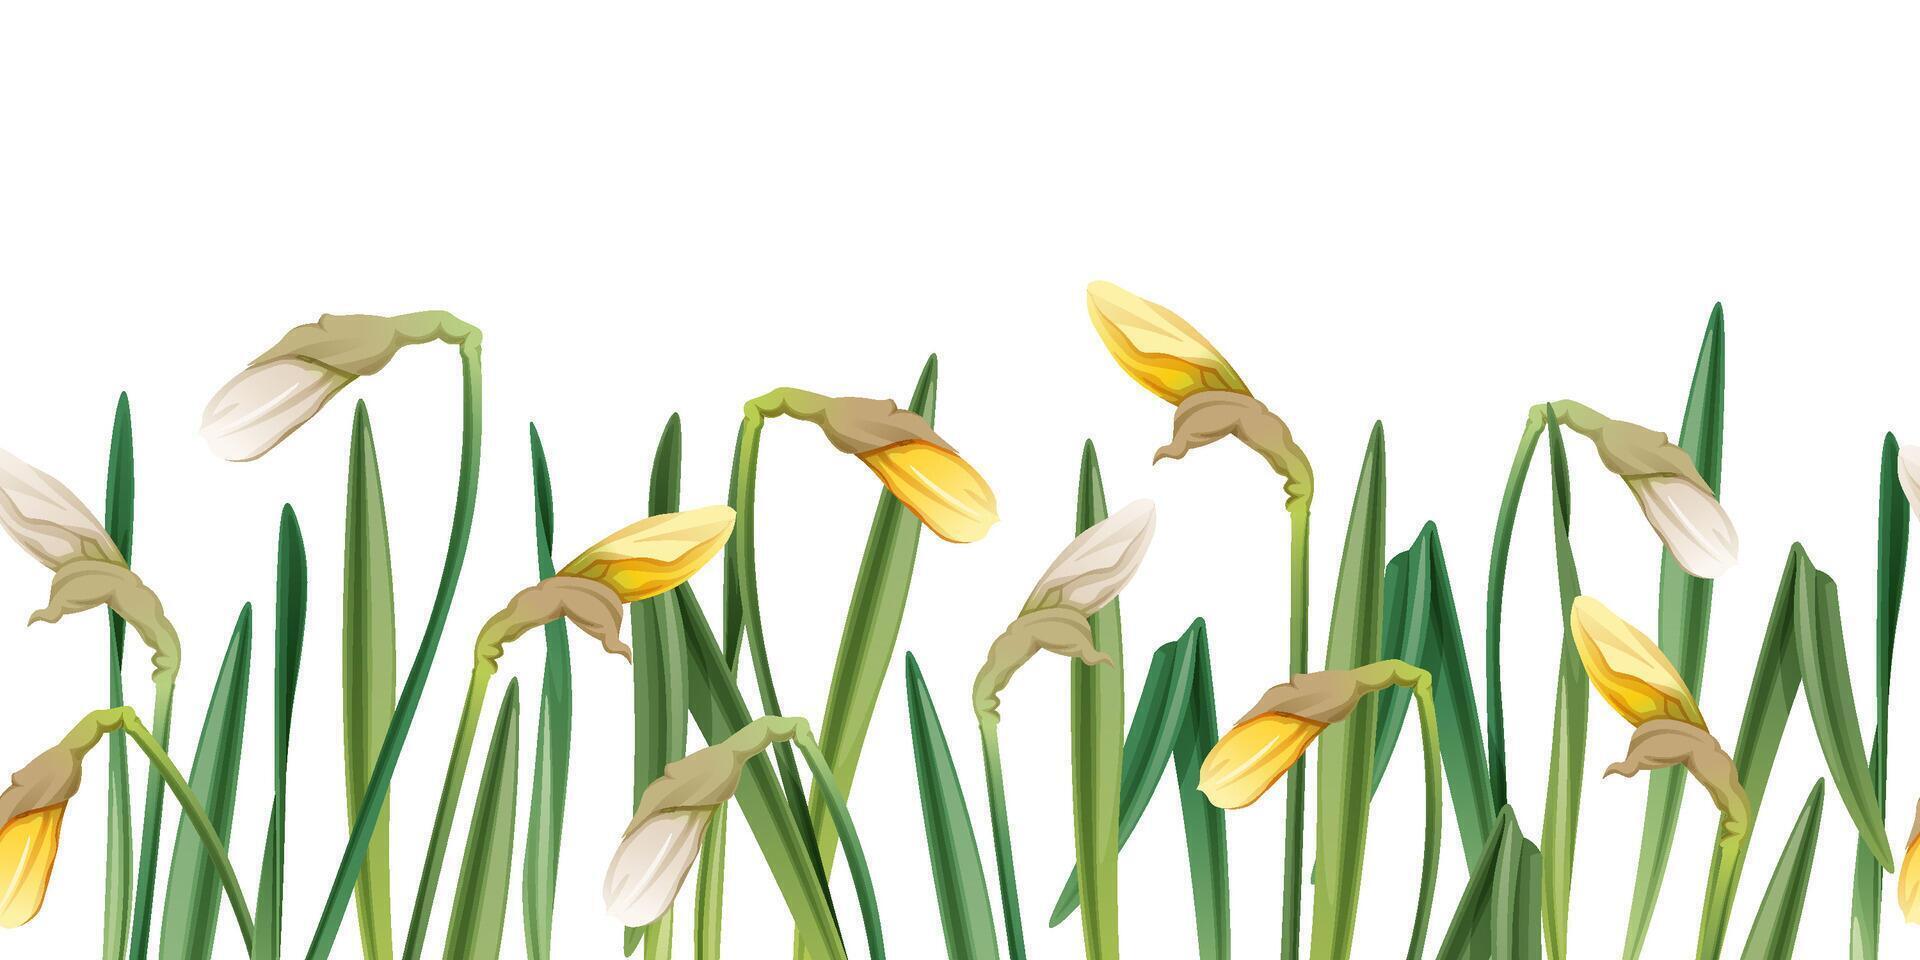 Seamless border of narcissus buds on an isolated background. Illustration with spring flowers for Easter. Suitable for decor, fabric, cards, backgrounds, wallpapers vector